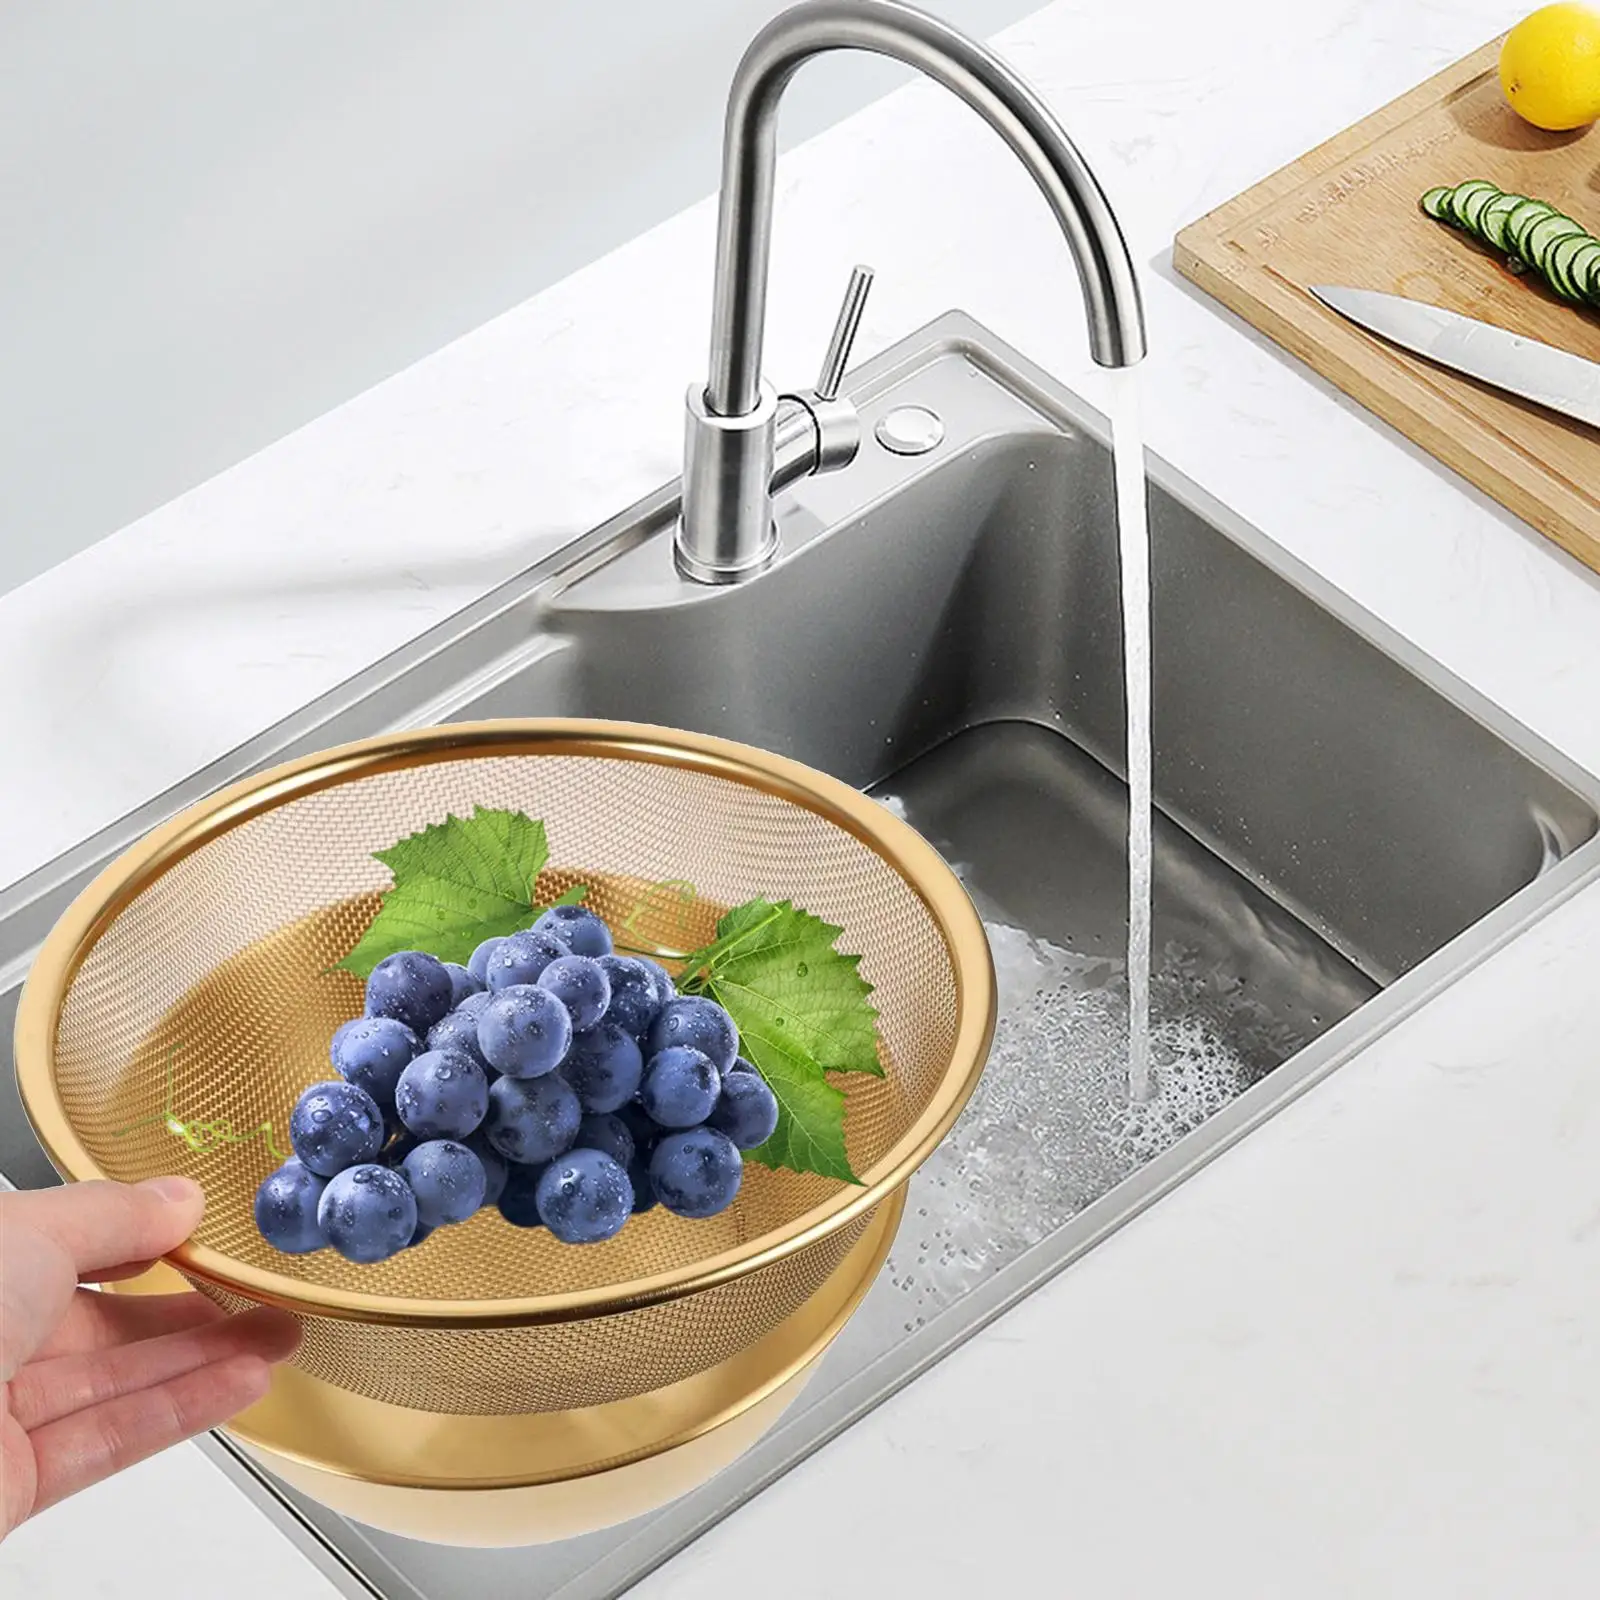 Stainless Steel Colander Bowl Stackable Kitchen Strainer Washer Multifunctional Draining Basket for Mixing Cleaning Fruits Pasta